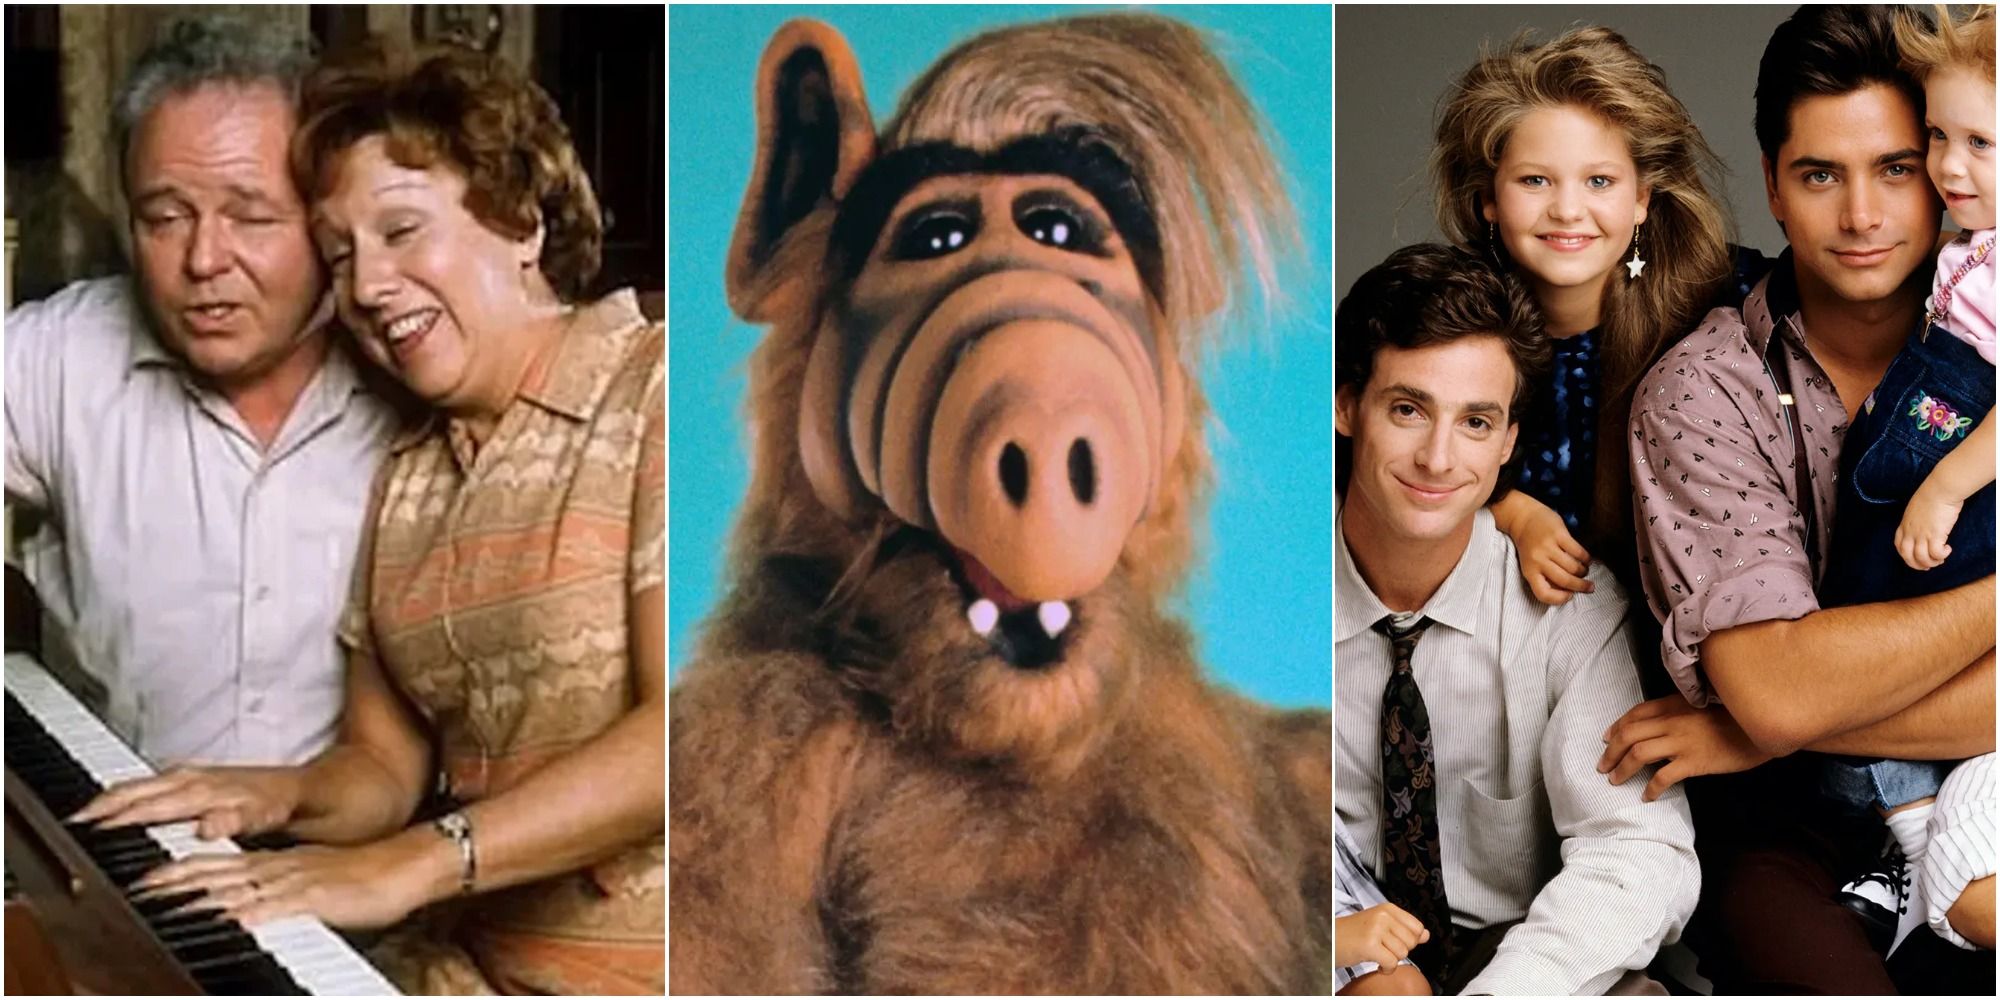 Header with ALF, All In The Family and Full House